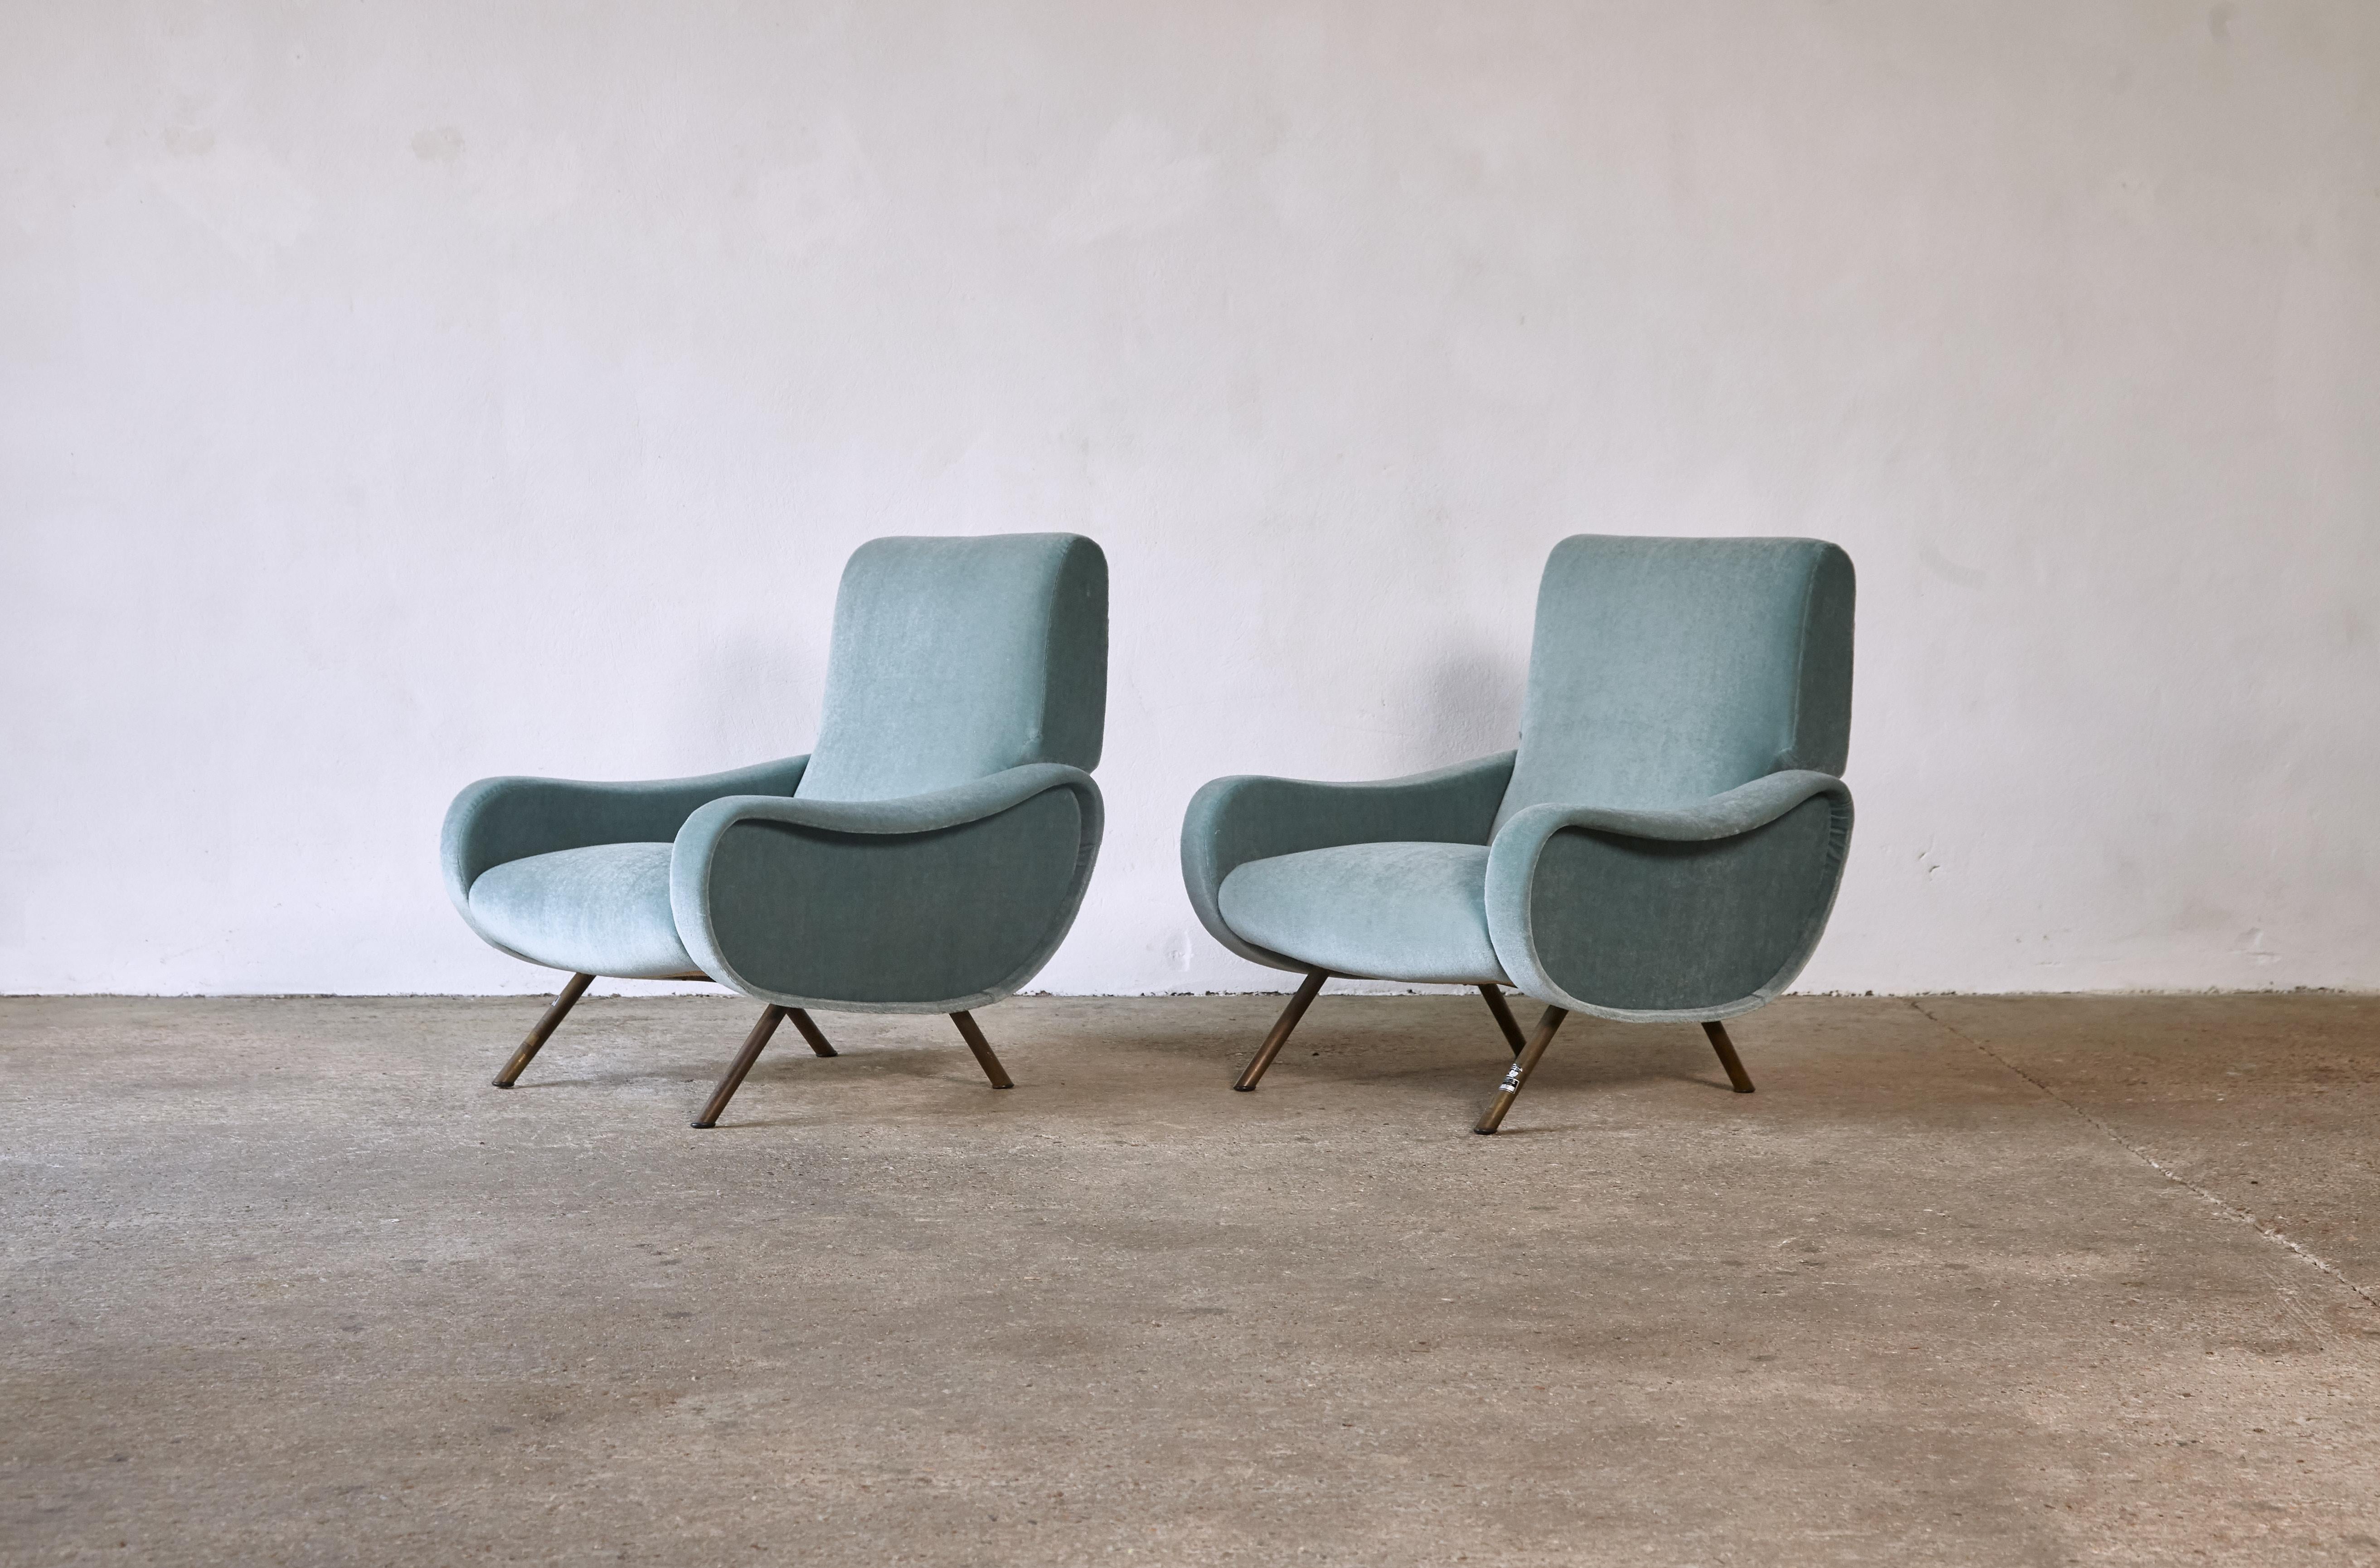 20th Century Authentic Marco Zanuso Lady Chairs, 1950s, Newly Reupholstered in Pure Mohair